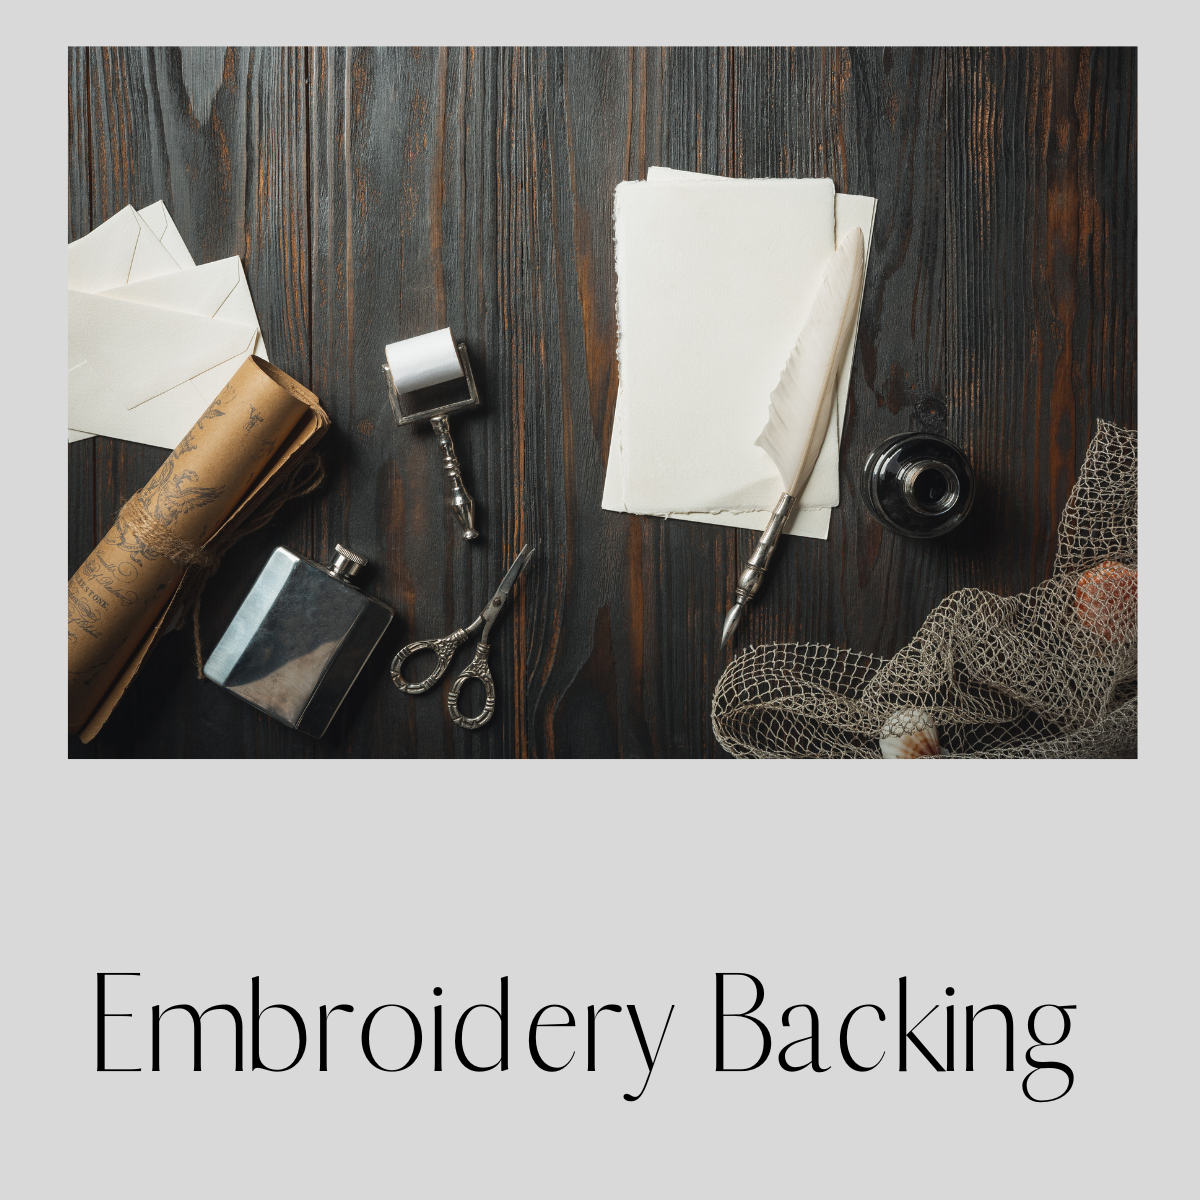 What is embroidery backing